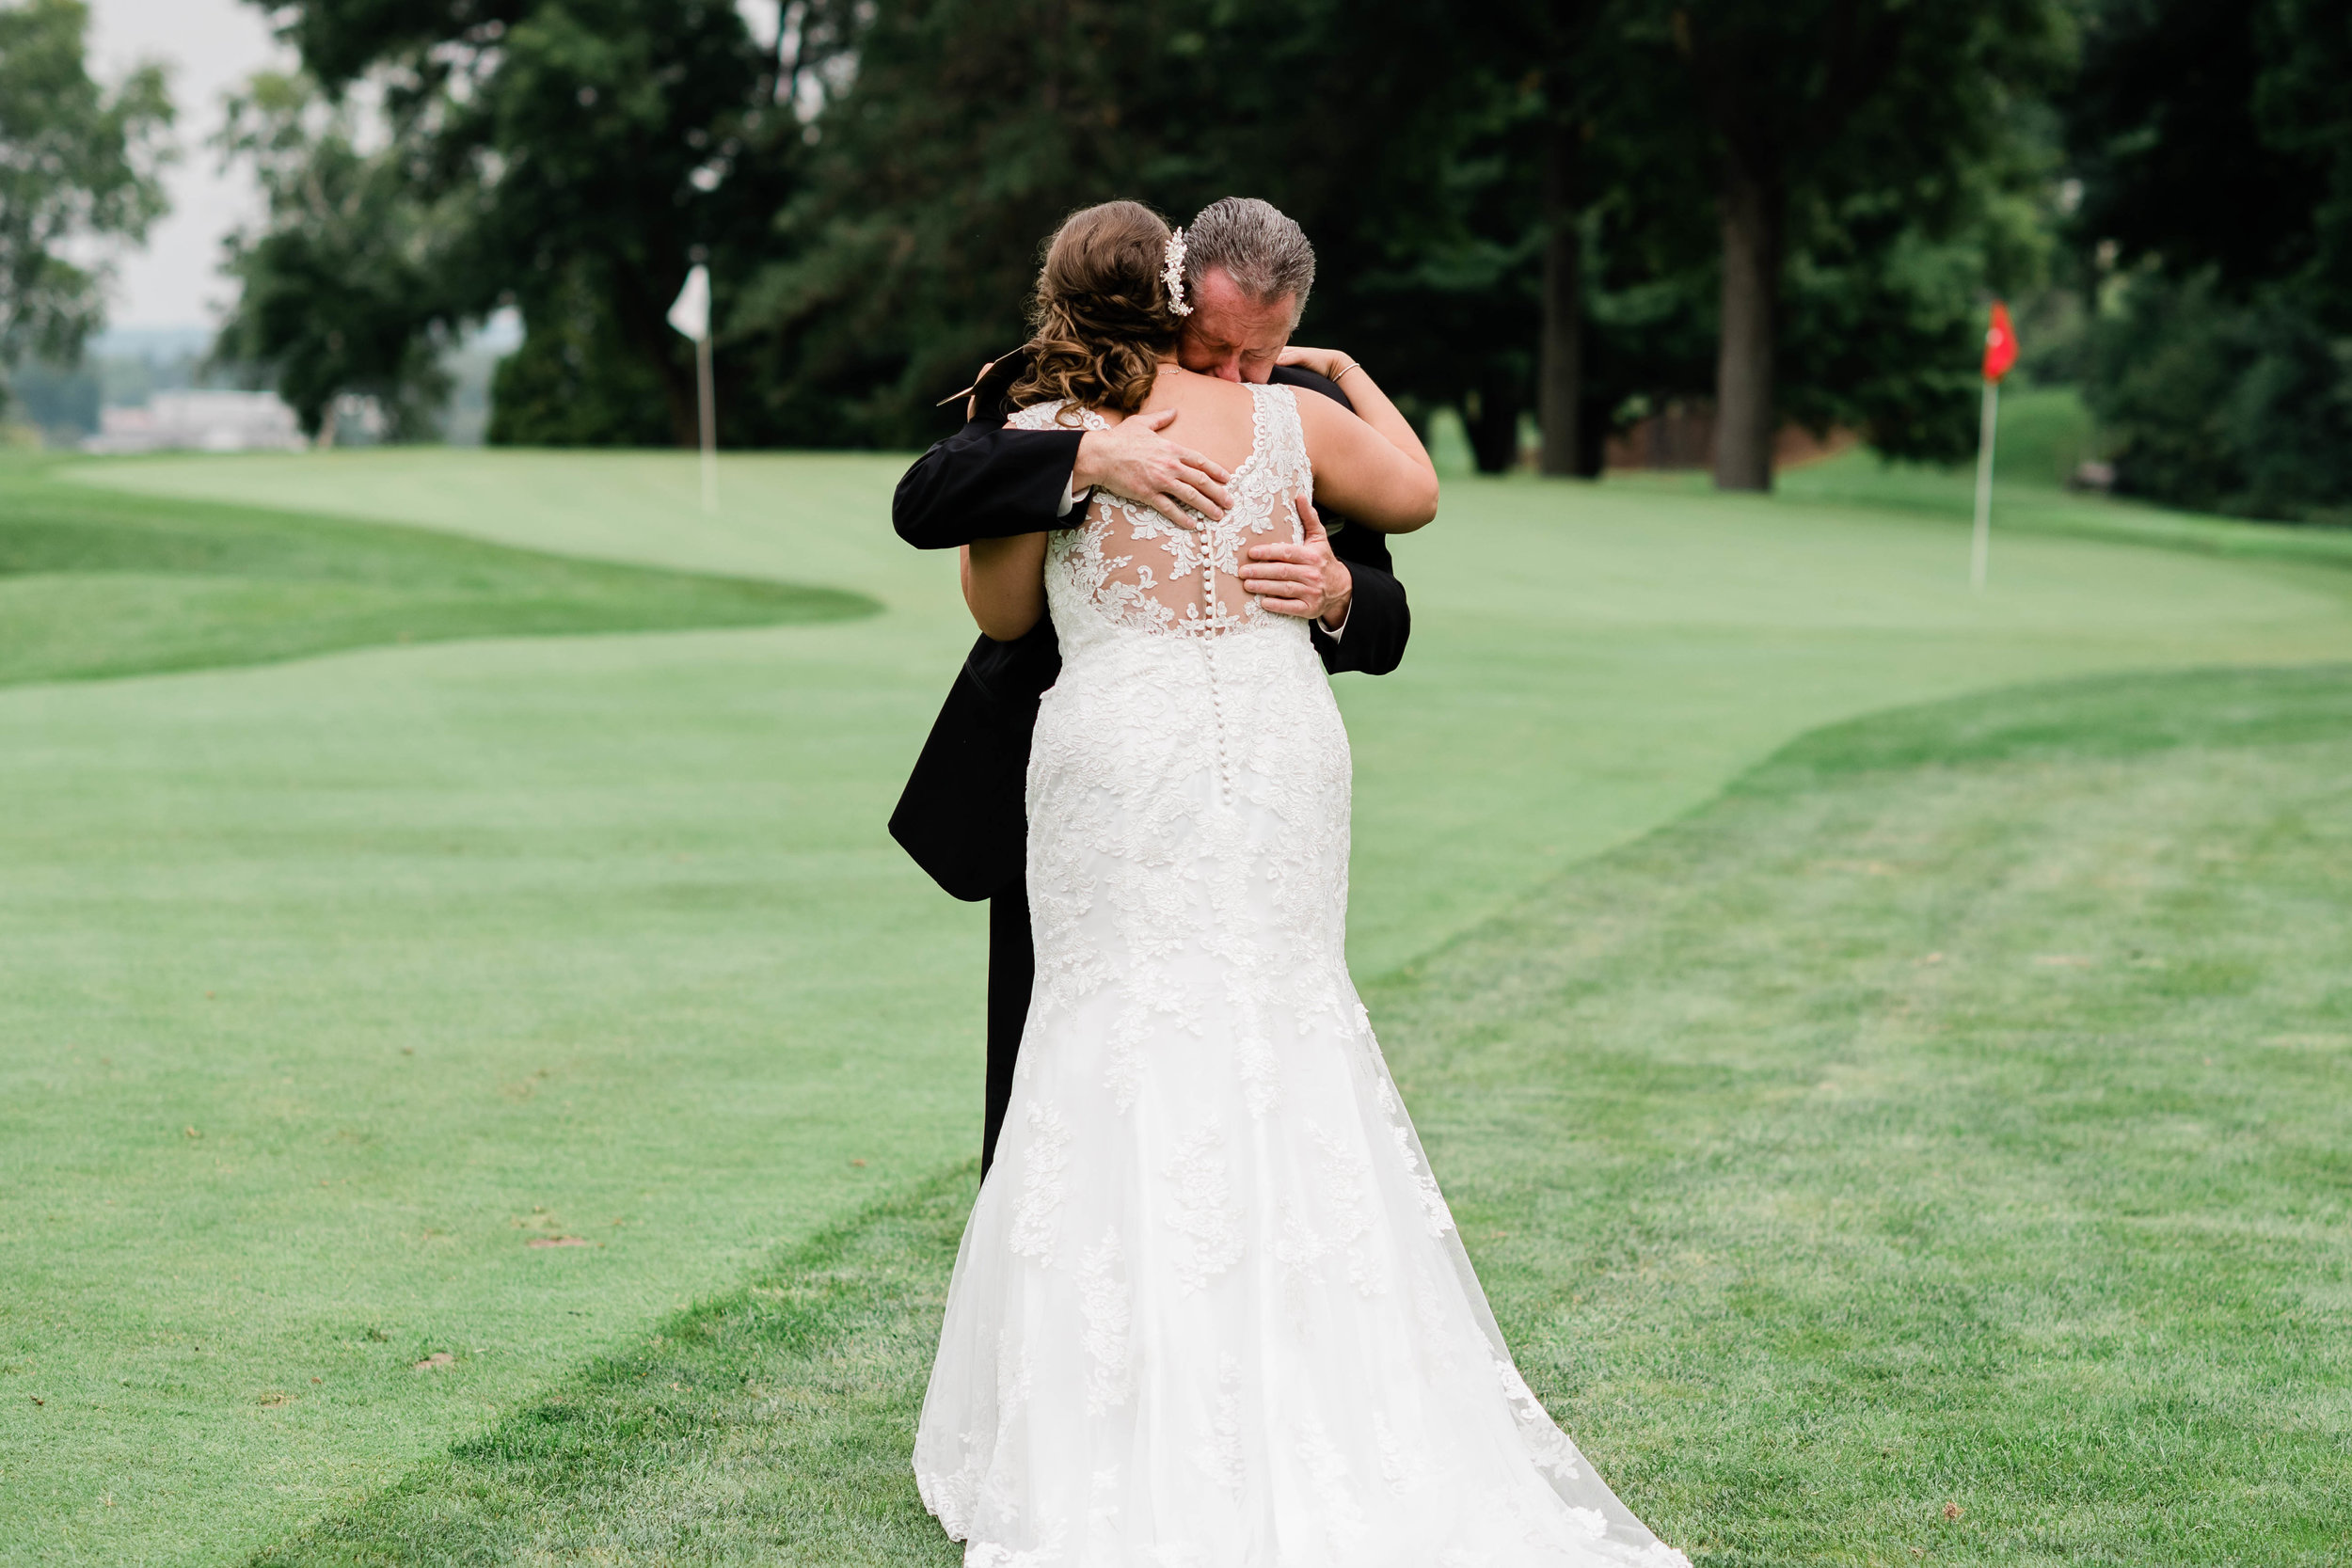 Dad hugs his daughter on her wedding day